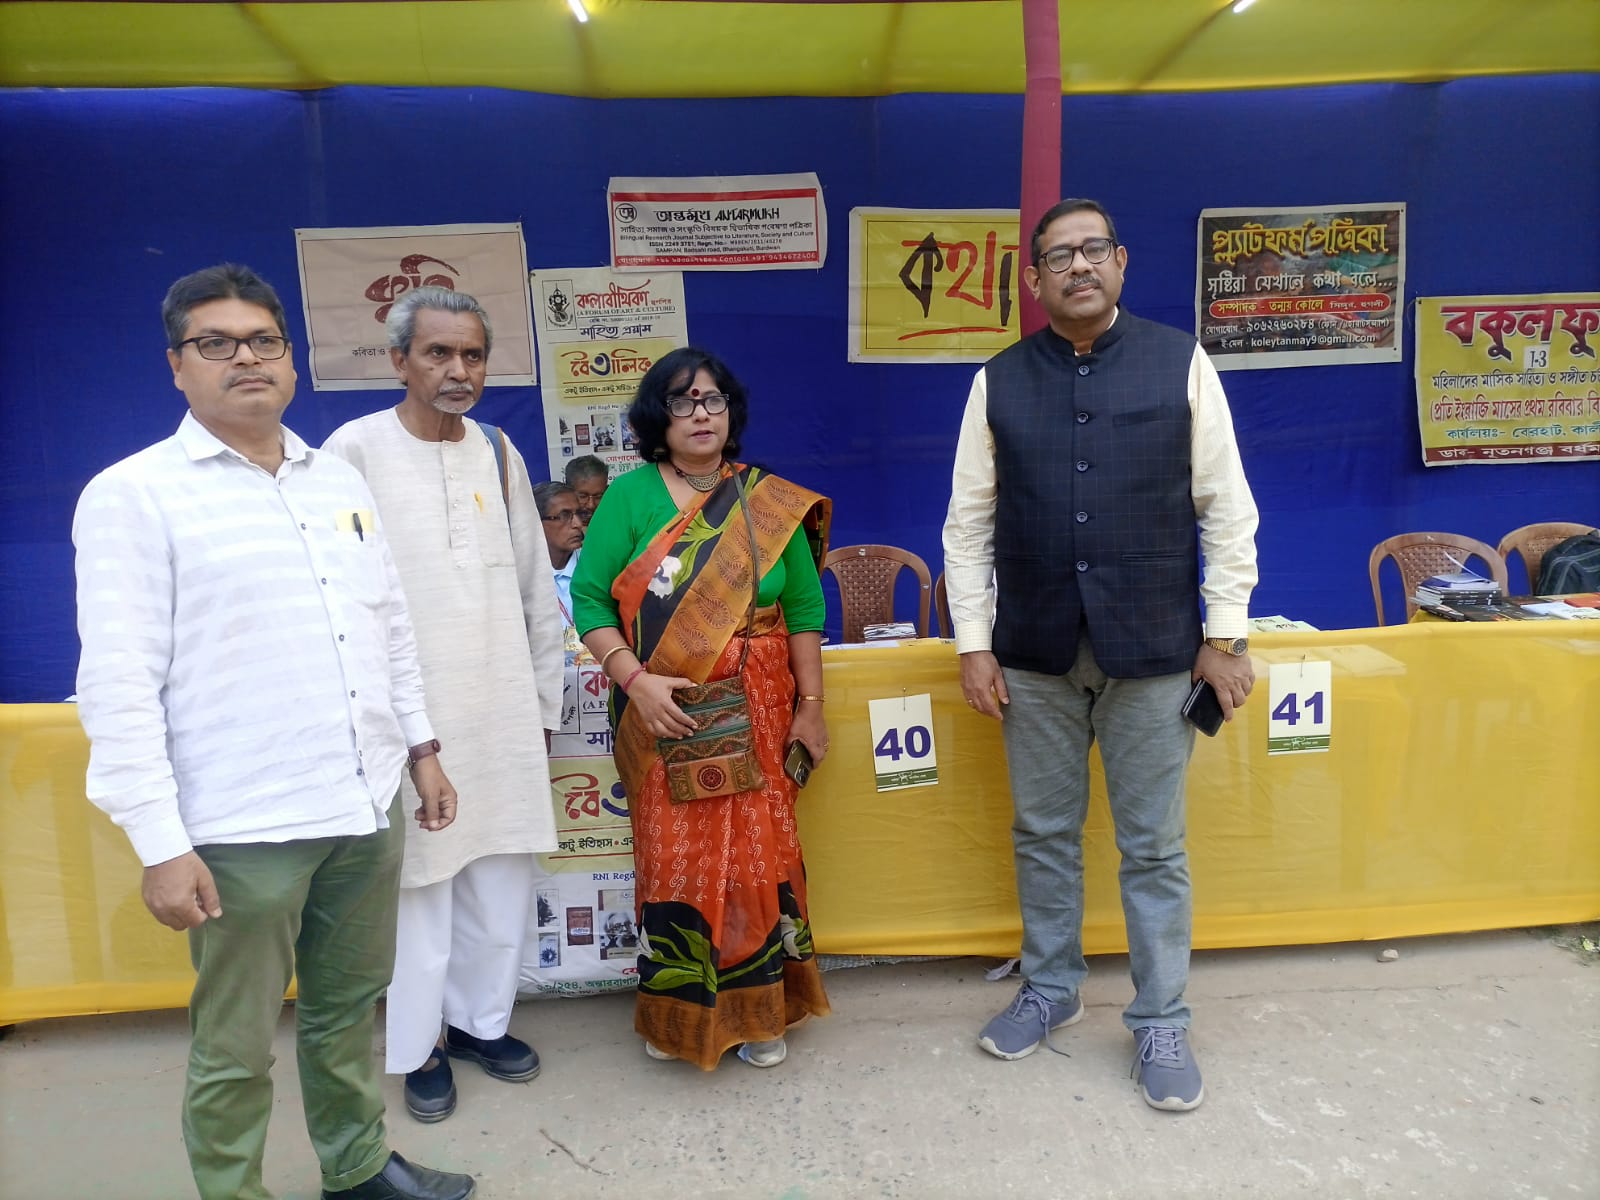 The Antarmukh editorial group in Burdwan little magazine fair with their journal on 24th november 2023